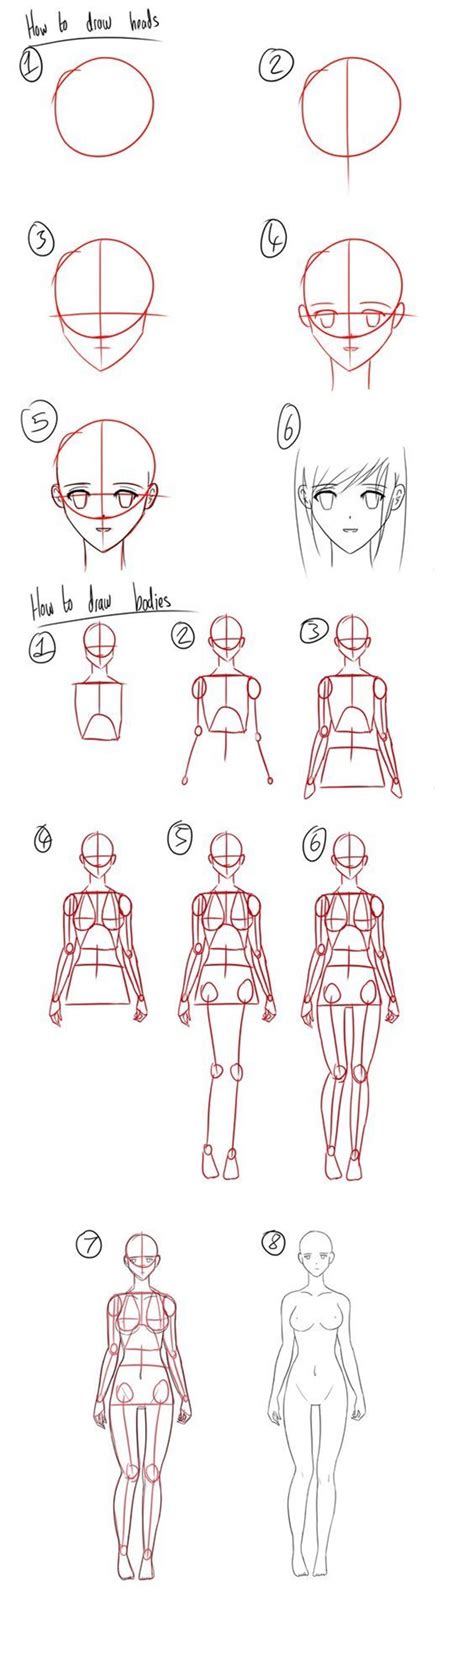 How to draw a male body step by step tutorials easy drawing for kidslearning how to draw a male body is very simple!in very little time, through a little rep. How to Draw Anime Characters Step by Step (30 Examples)